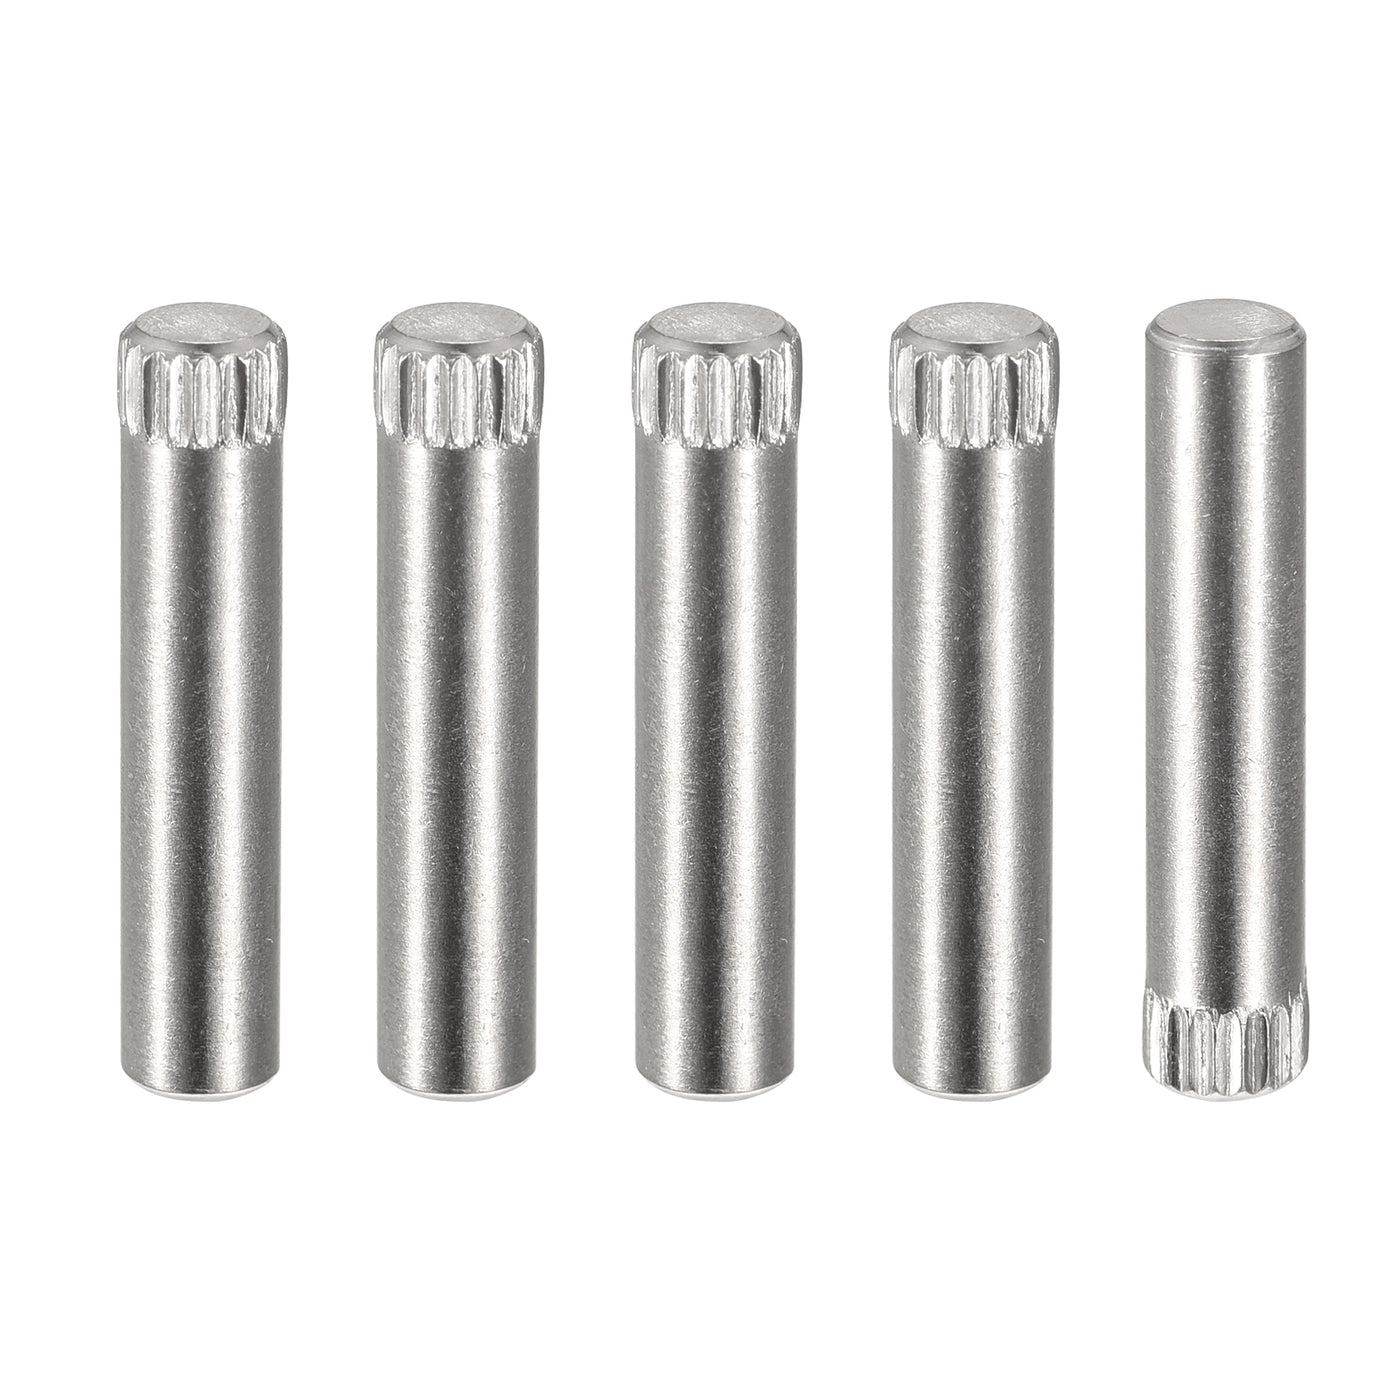 uxcell Uxcell 5x25mm 304 Stainless Steel Dowel Pins, 5Pcs Knurled Head Flat End Dowel Pin